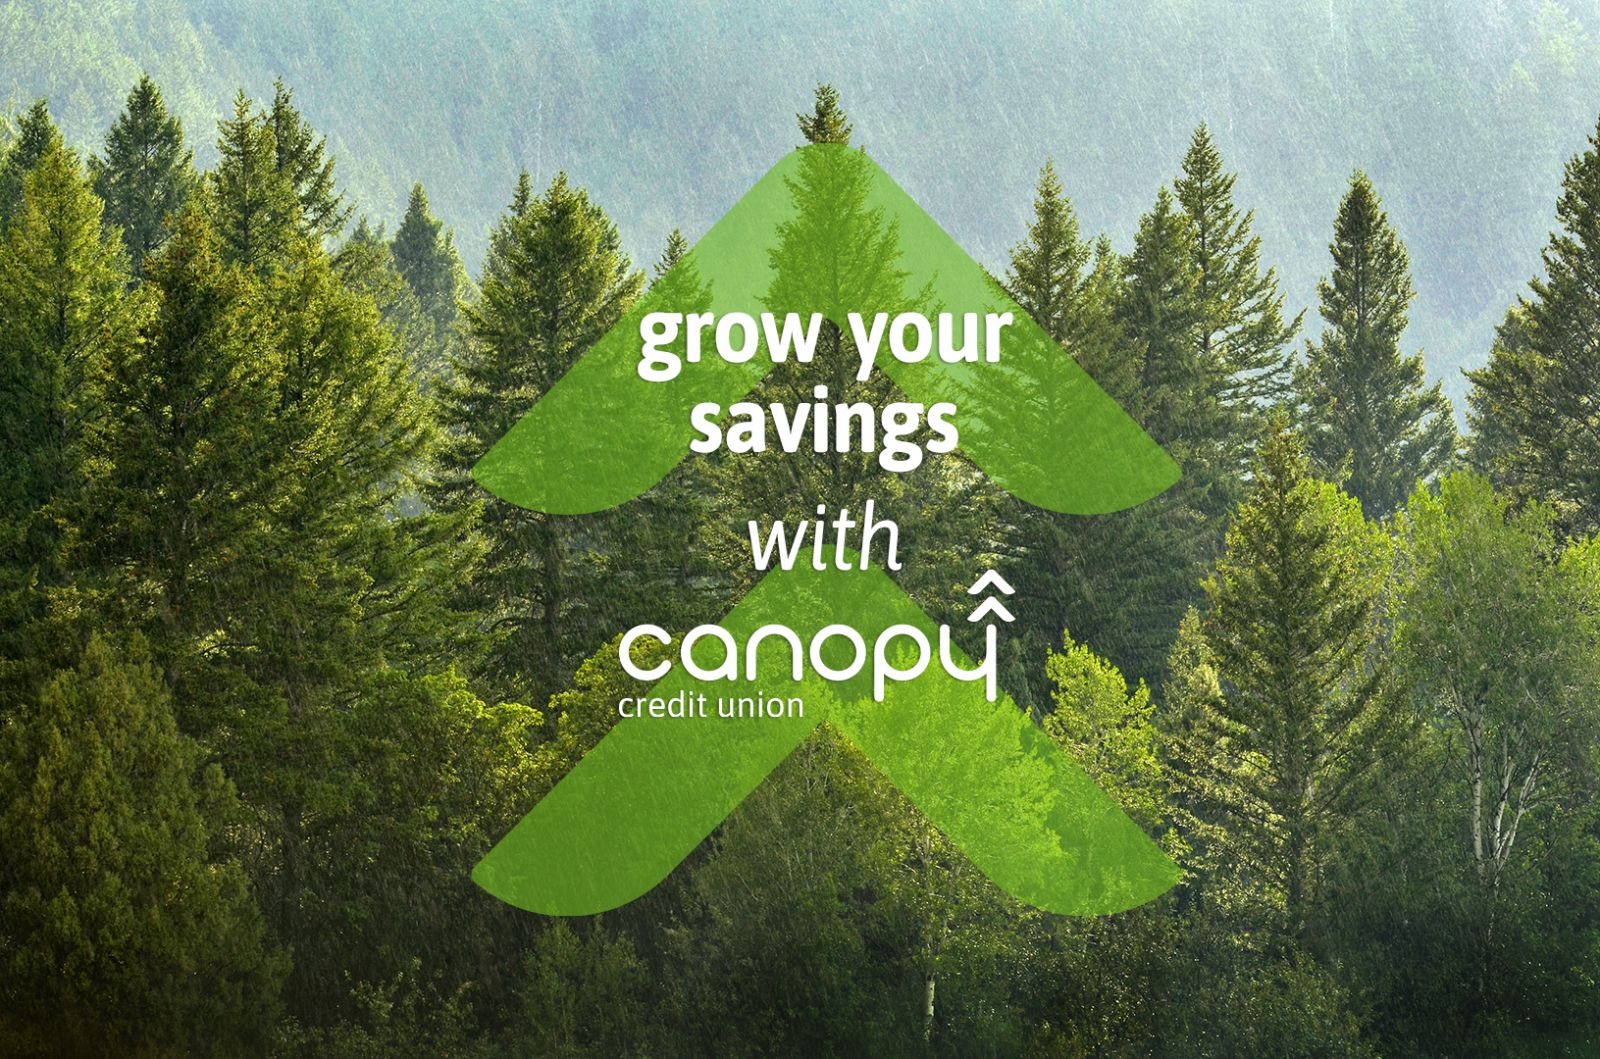 grow your savings with Canopy Credit union term share 18 month special